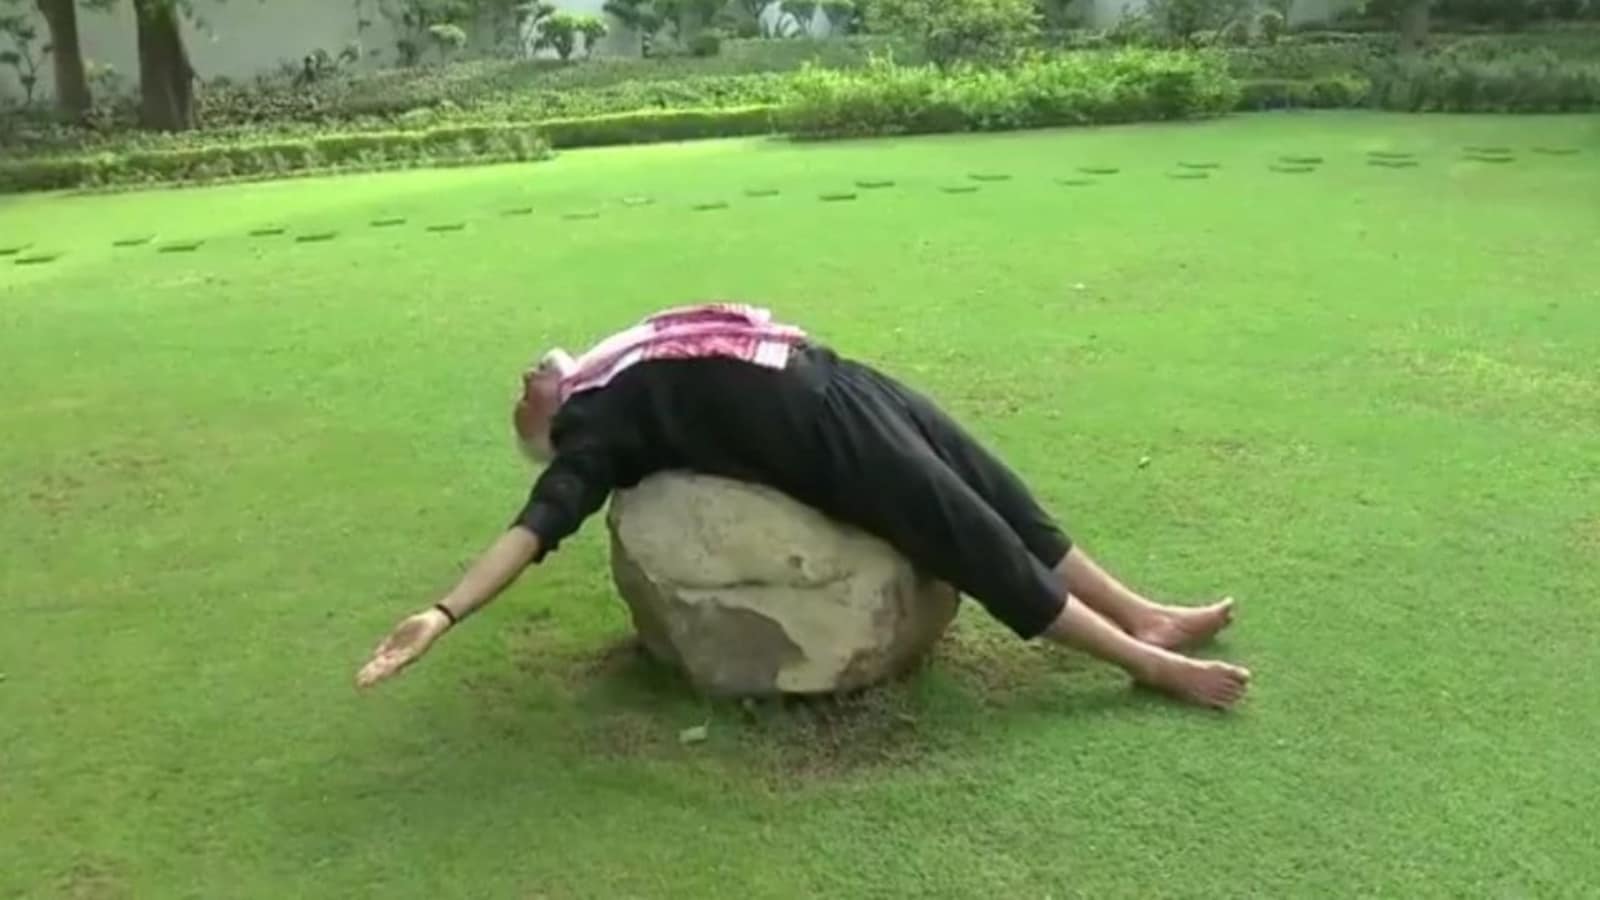 International Yoga Day | Bringing the funniest moments, fresh from Twitter